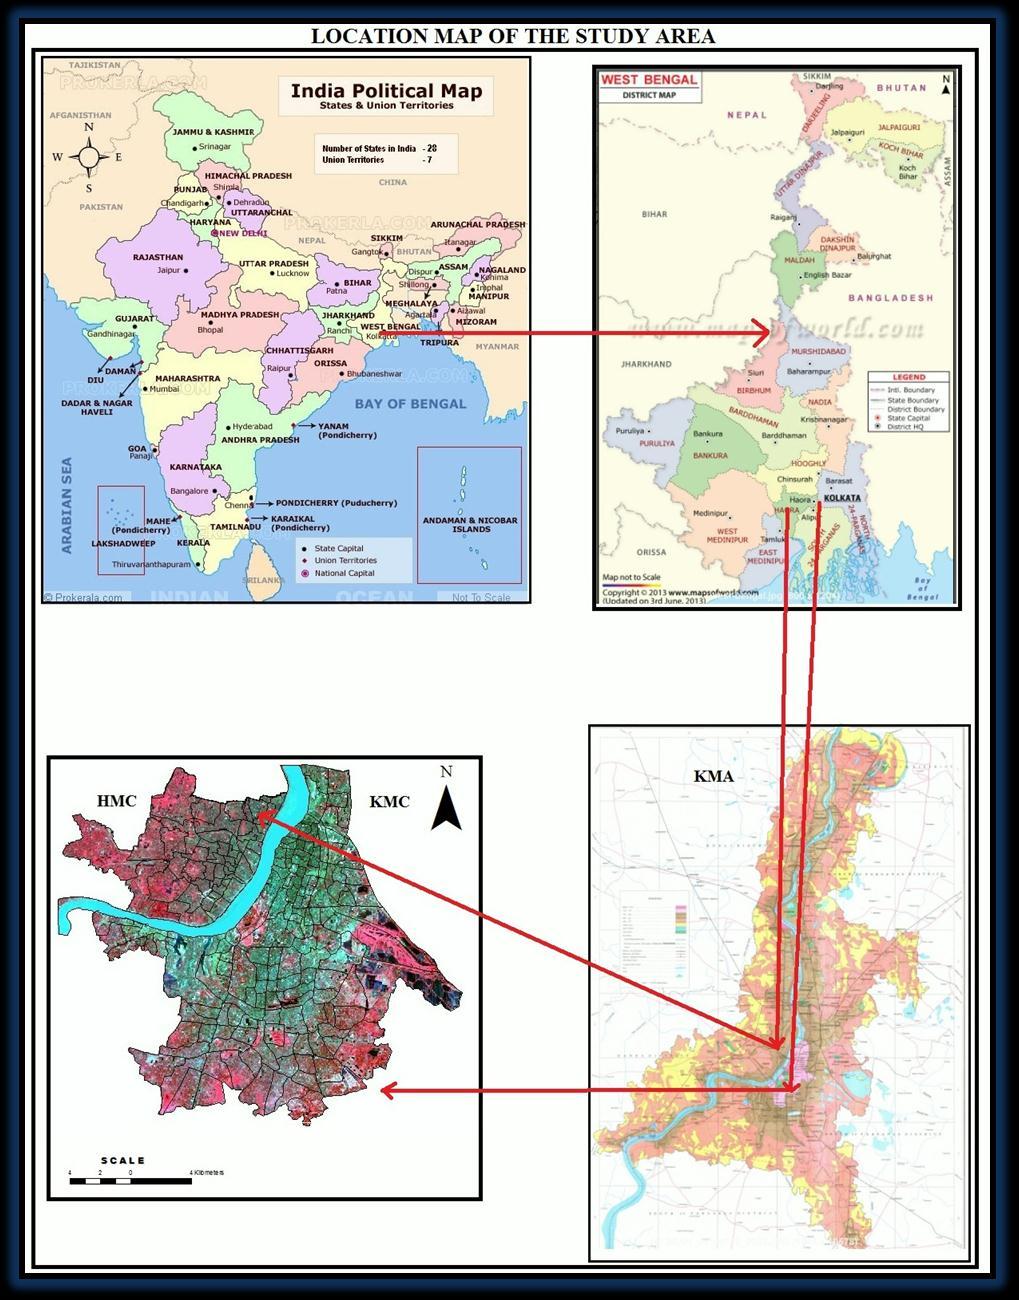 demonstrated/proposed models in urban geographic studies. The present study areas are shown as Figureure 1. The present study area is Kolkata Municipal Corporation and Haora Municipal Corporation.